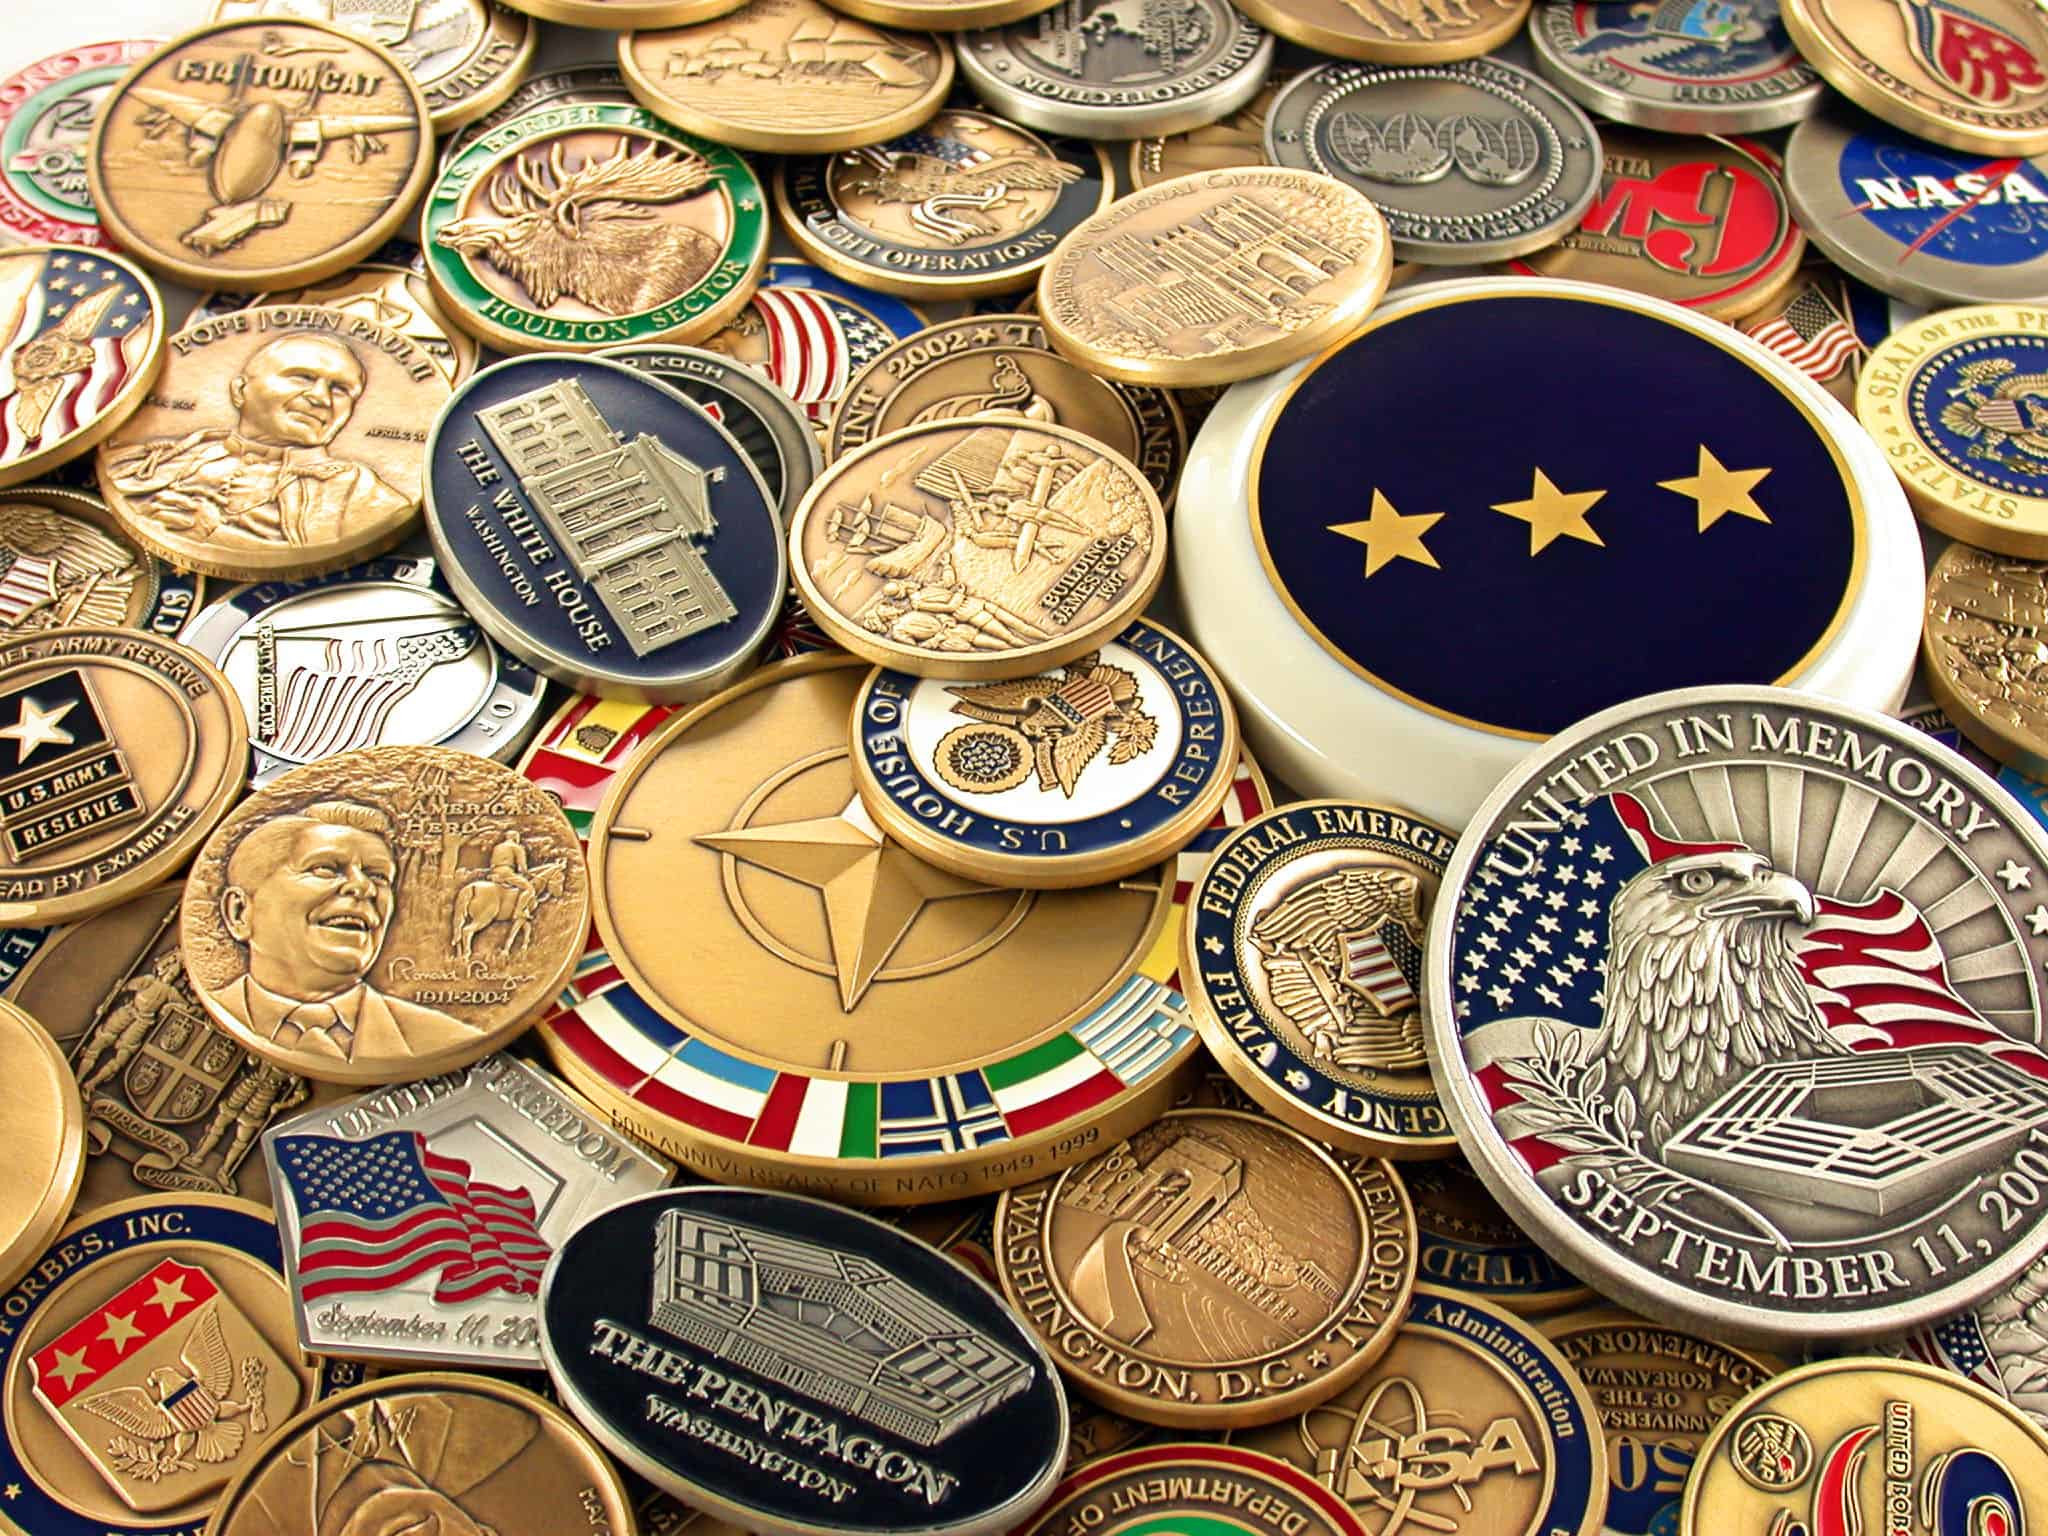 How Big Are Challenge Coins?